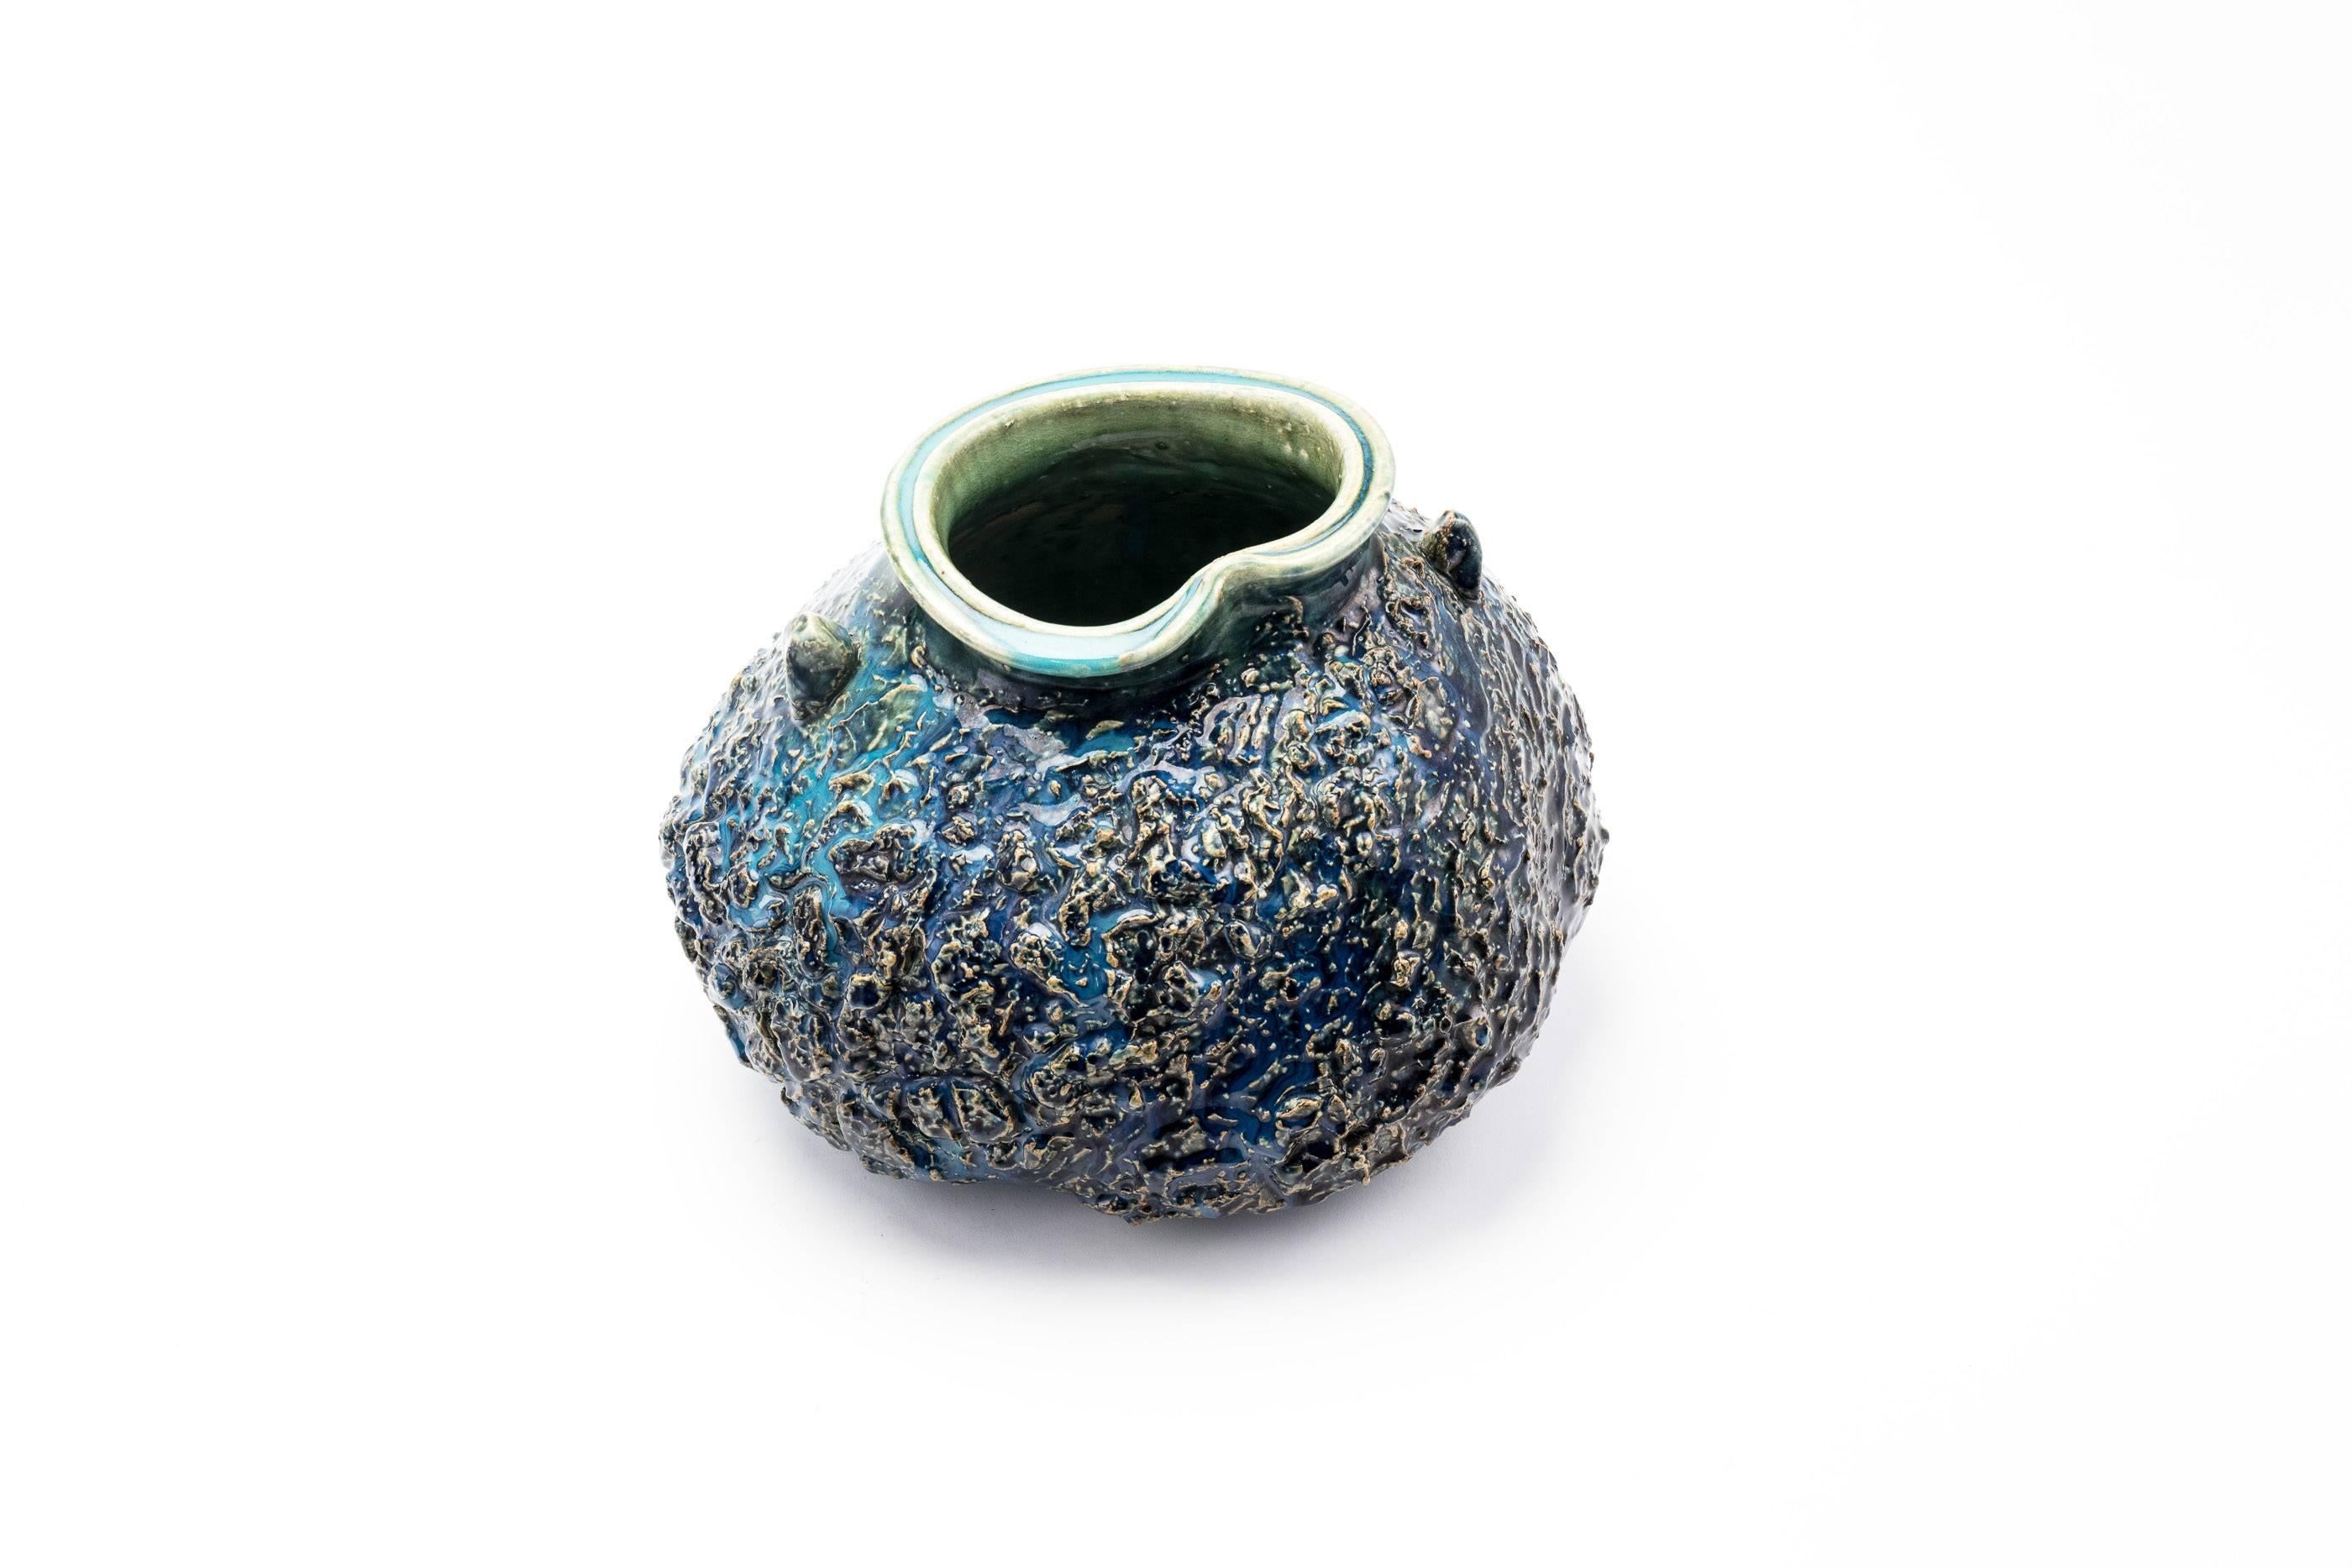 Mid-20th century Japanese Seto pottery vase by Yamaguchi Kozaemon 13th. The vase is hand built in an organic an form with a bright turquoise blue glaze, and high relief rough texture. The artist's signature is etched to the base. Includes the